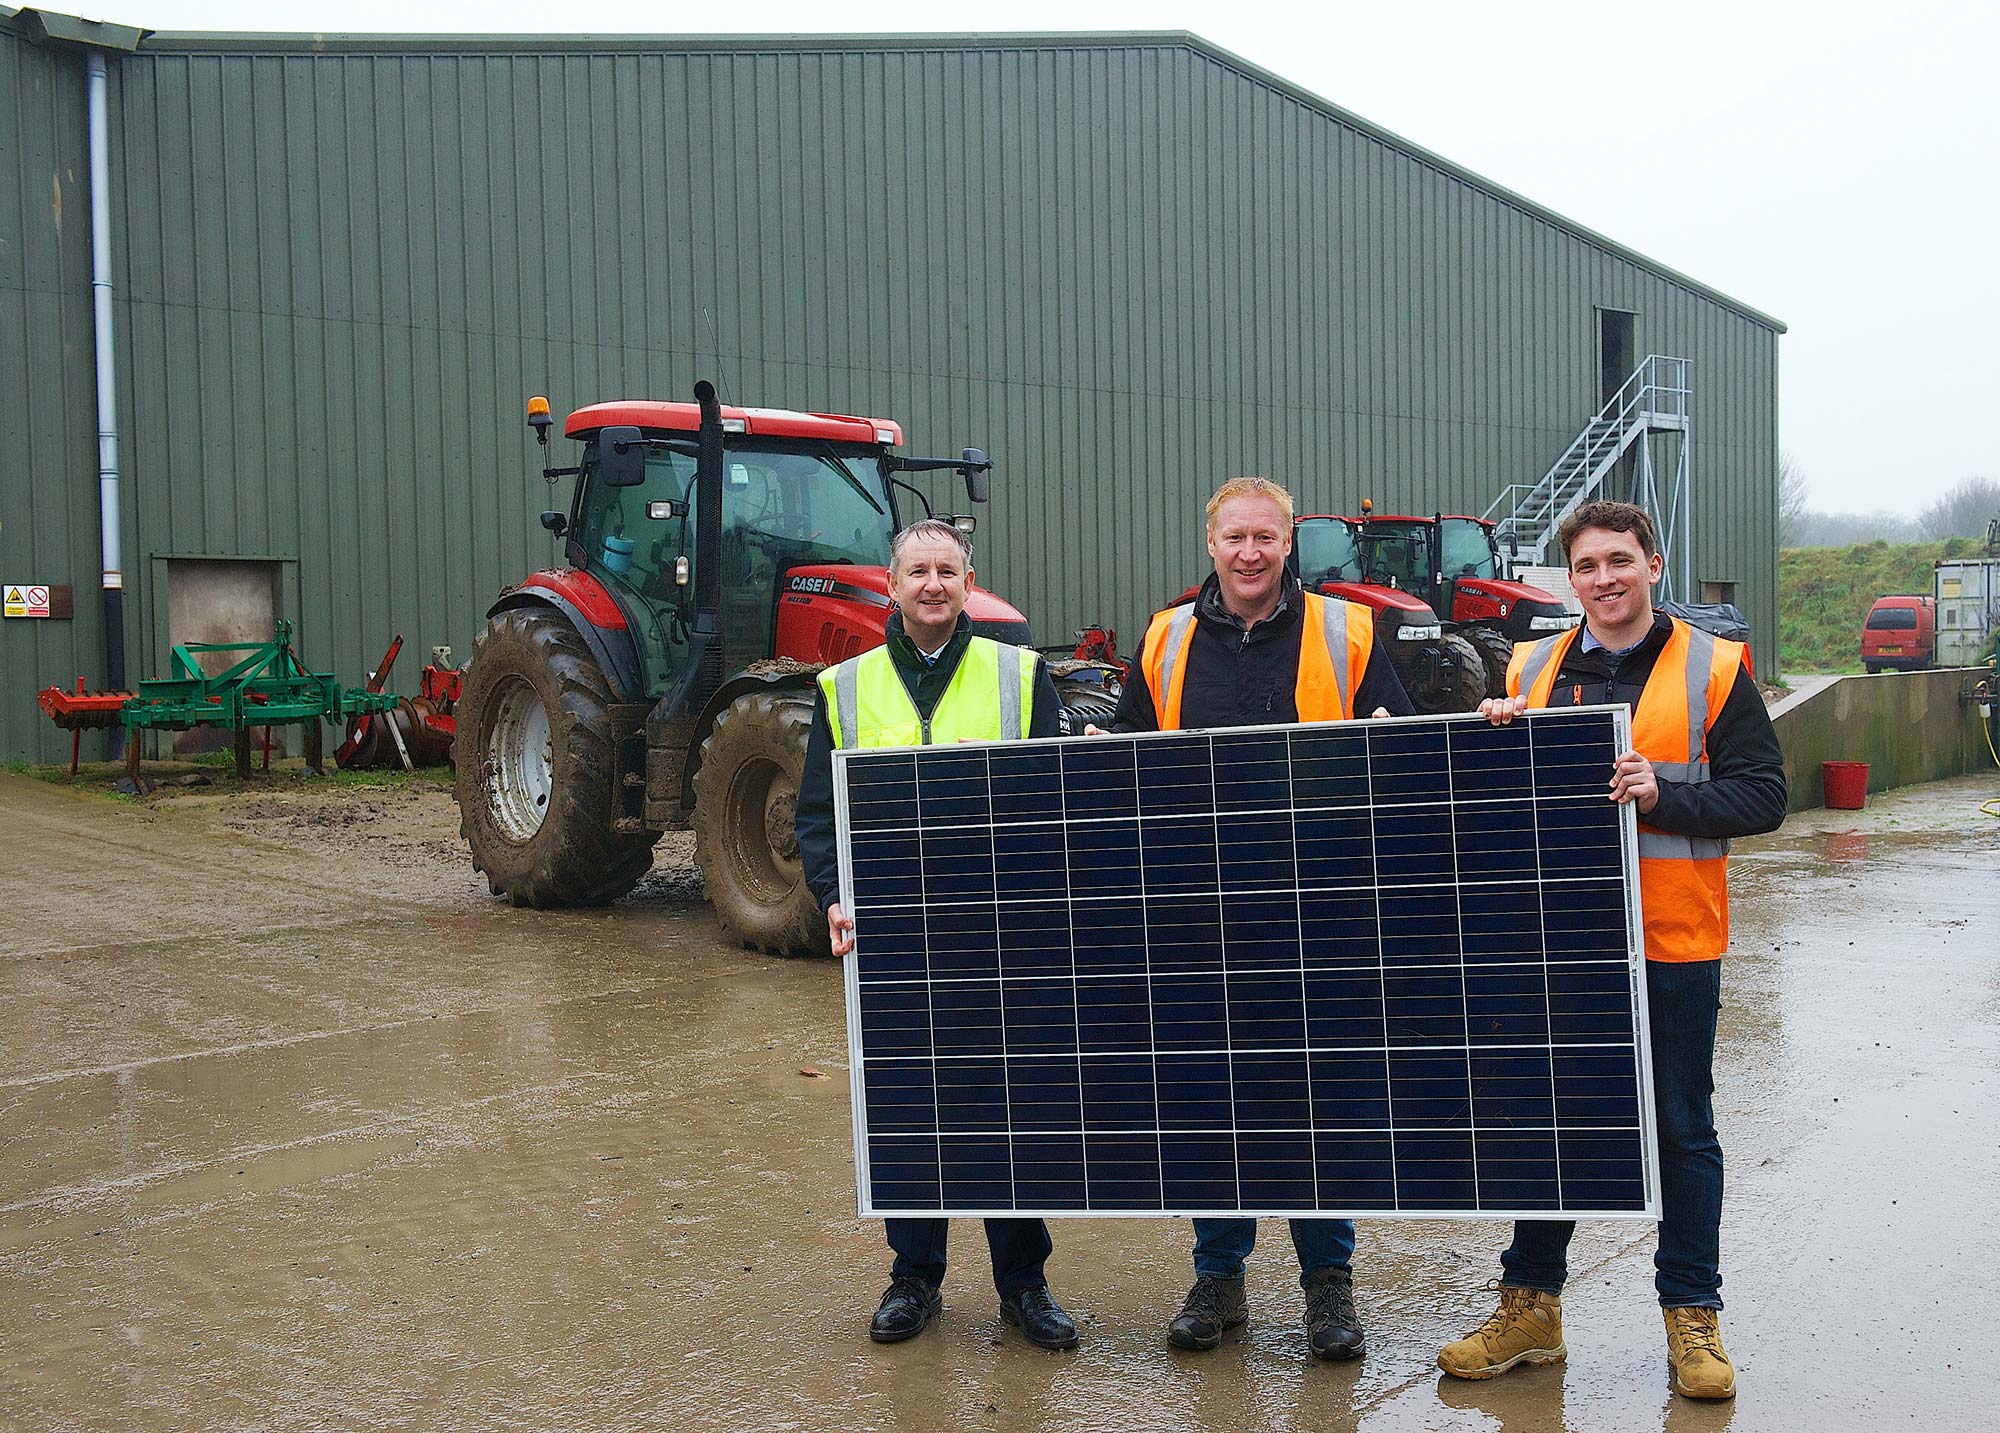 Three workers from JE, Sunworks and Woodside Barn hold a Solar PV panel.